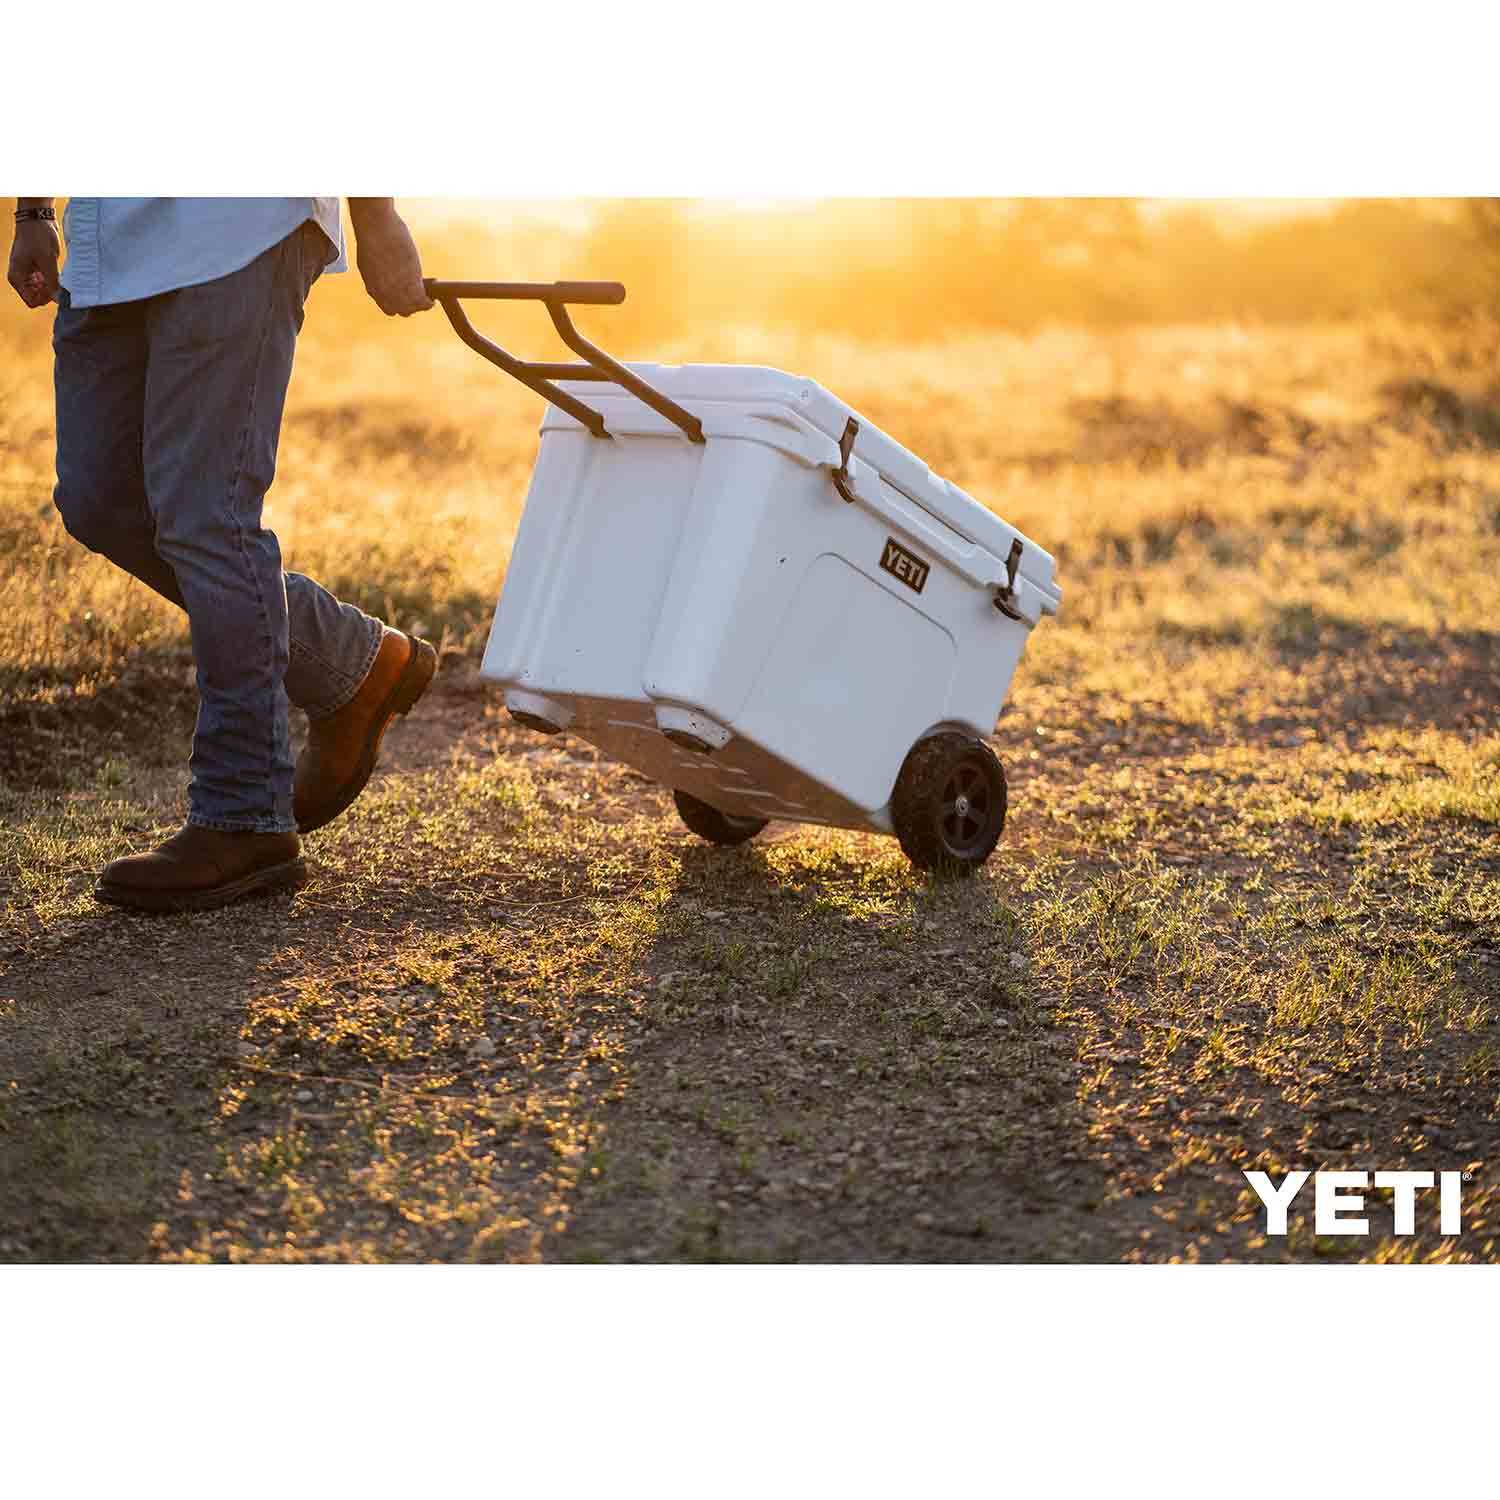 YETI Tundra Haul Wheeled Insulated Chest Cooler, Coral at